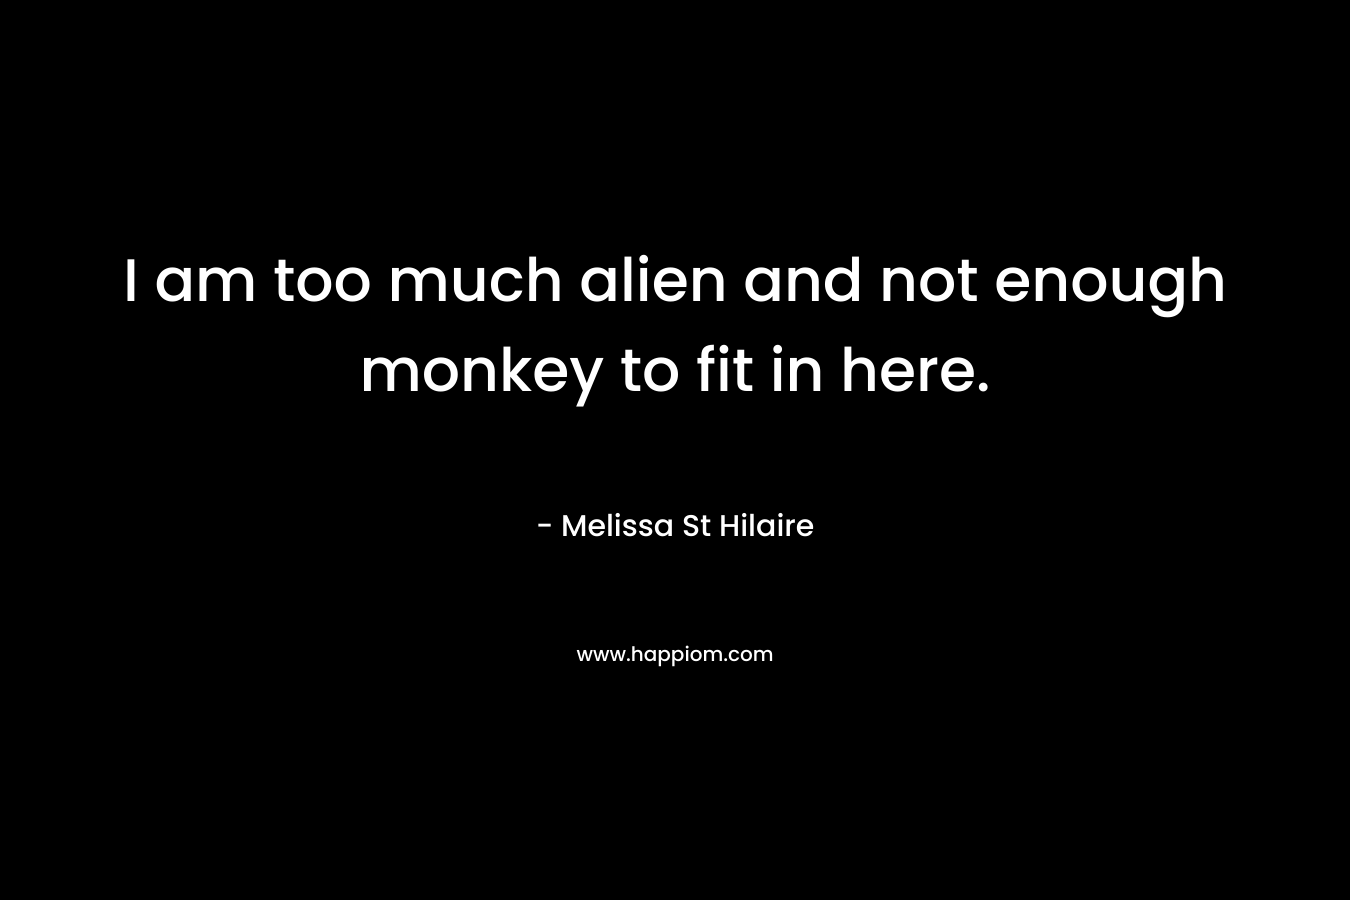 I am too much alien and not enough monkey to fit in here. – Melissa St Hilaire